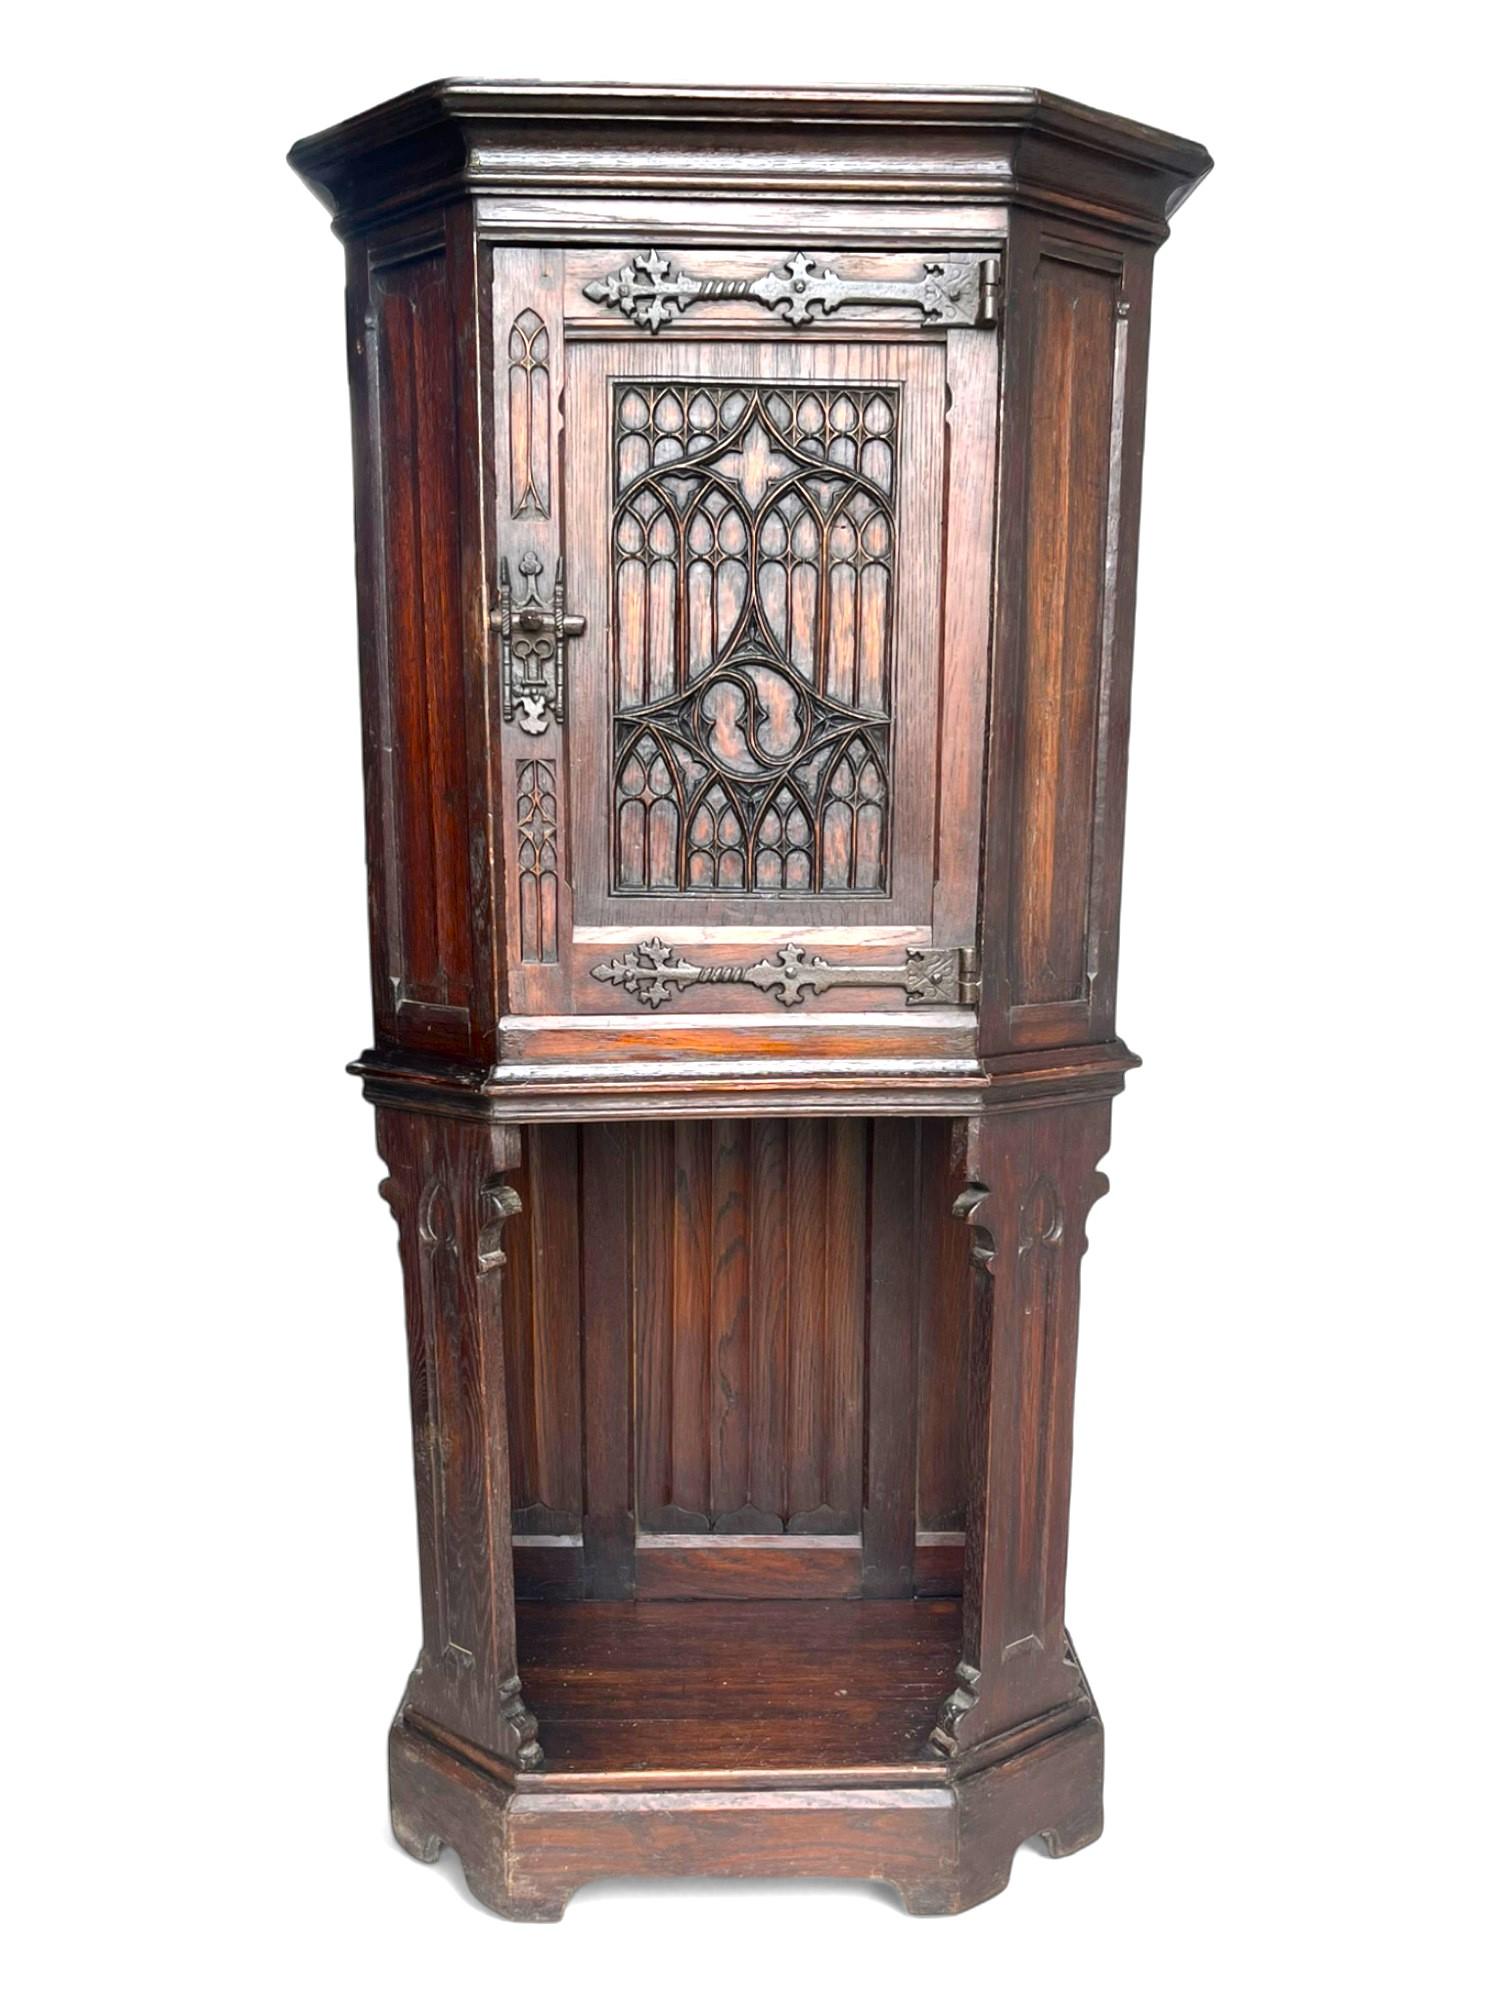 Very charming French Buffet / cabinet / credenza / dresser in molded and hand-carved oak in Gothic Revival (Neo Gothic) style.
The upper part opens with a door decorated with Sculptures on the facade.
All fittings are hand forged.
The door opens and